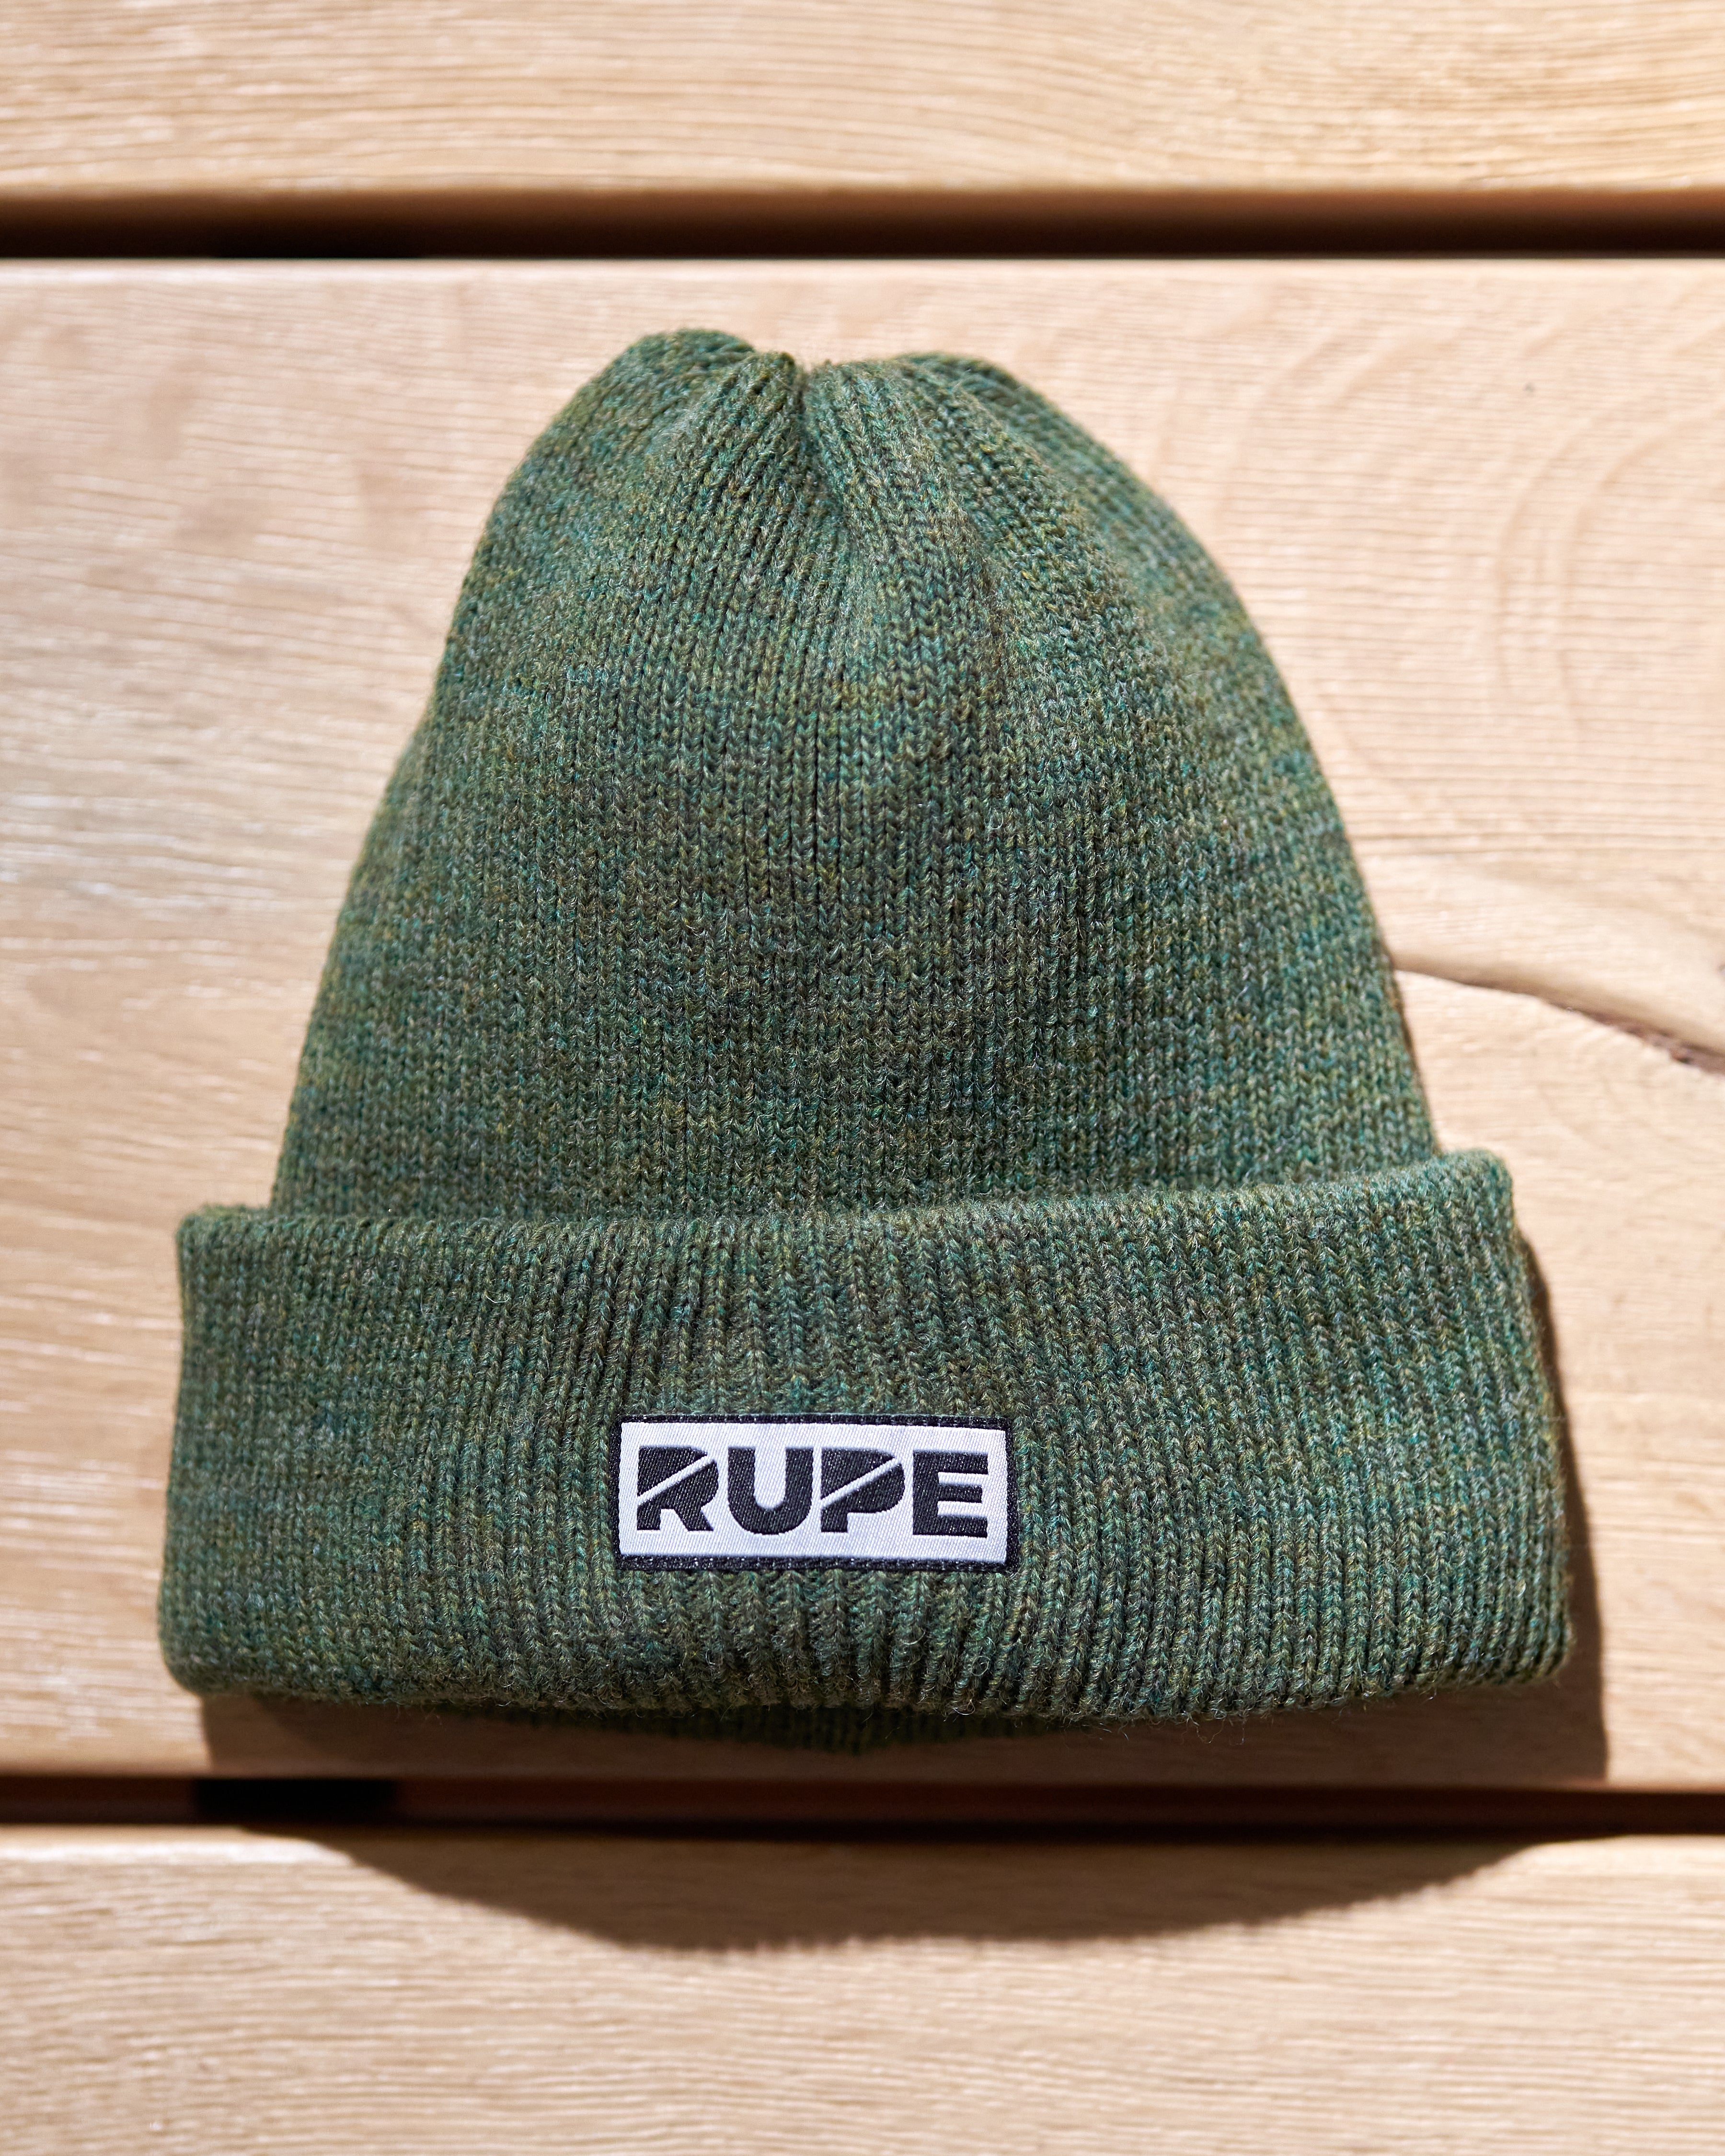 Sheep Rupe Beanie Hat by Brazz - Green